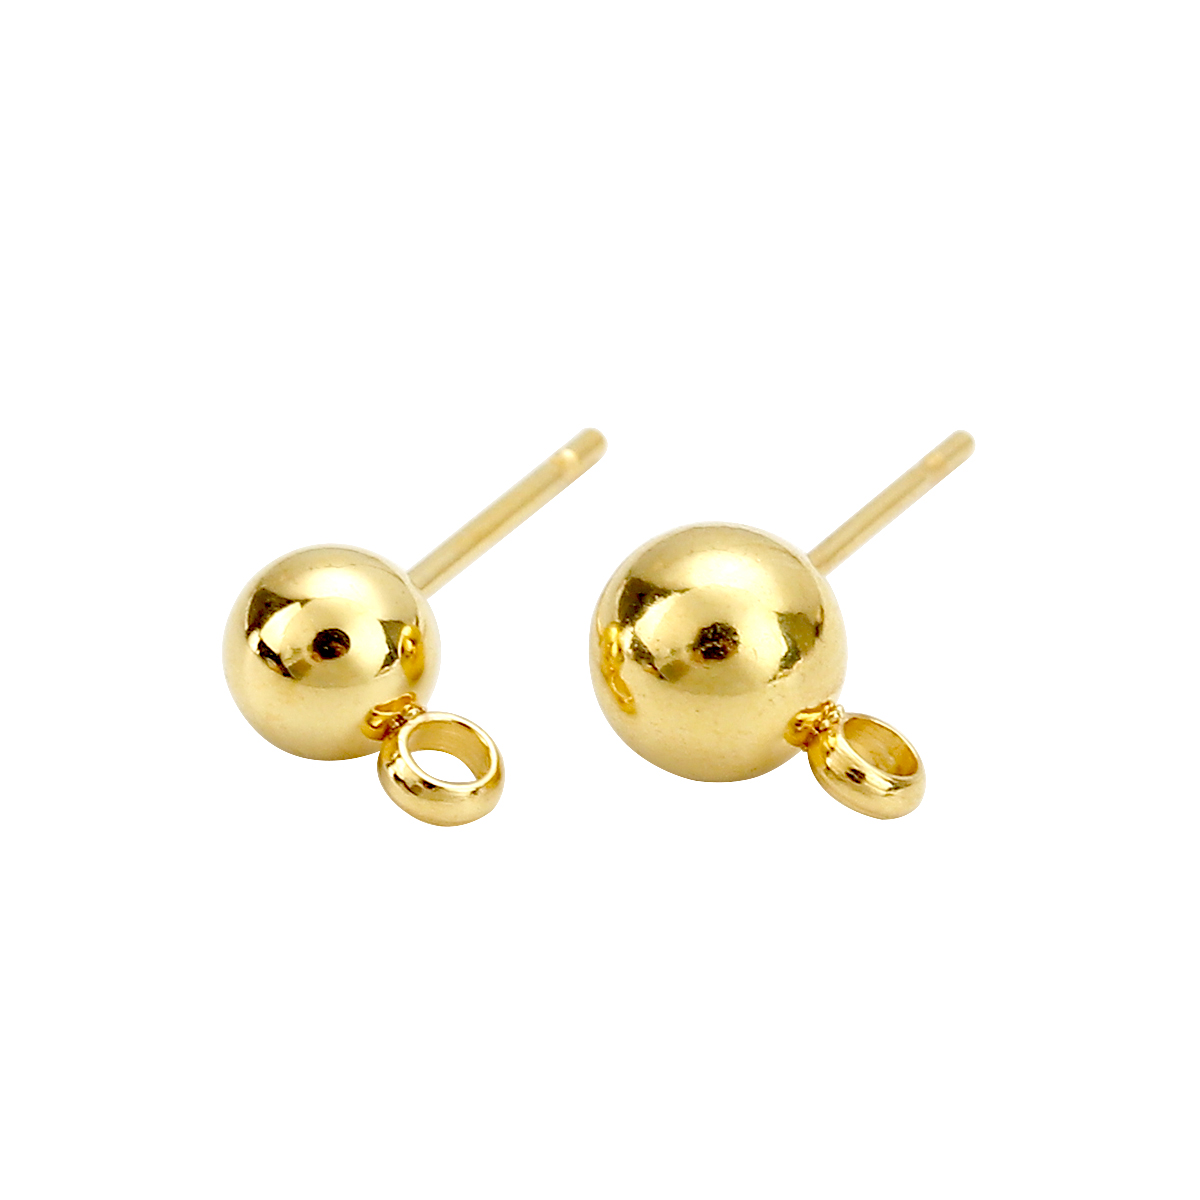 Picture of 304 Stainless Steel Ear Post Stud Earrings Ball Gold Plated W/ Loop 9mm( 3/8") x 6mm( 2/8"), Post/ Wire Size: (21 gauge), 6 PCs